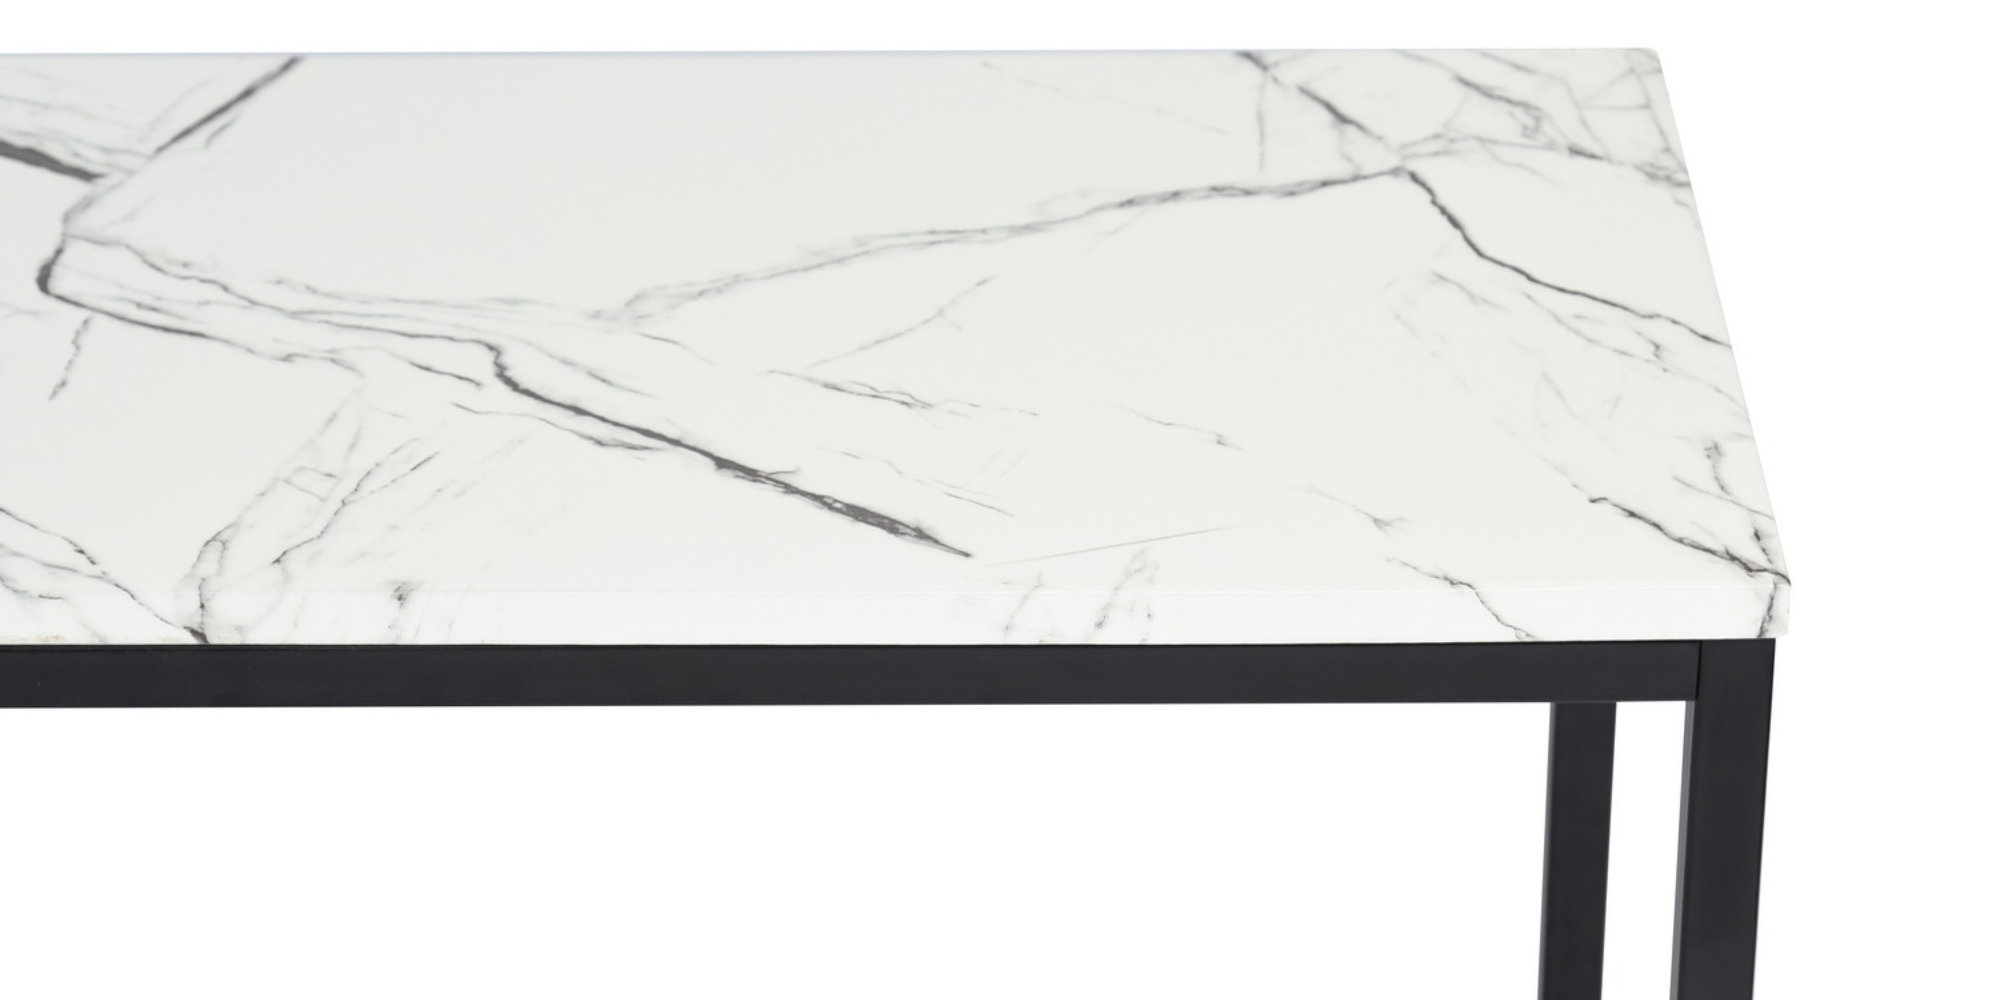 Upgrade Your Home Decor with this TV Stand's Faux Marble Finish